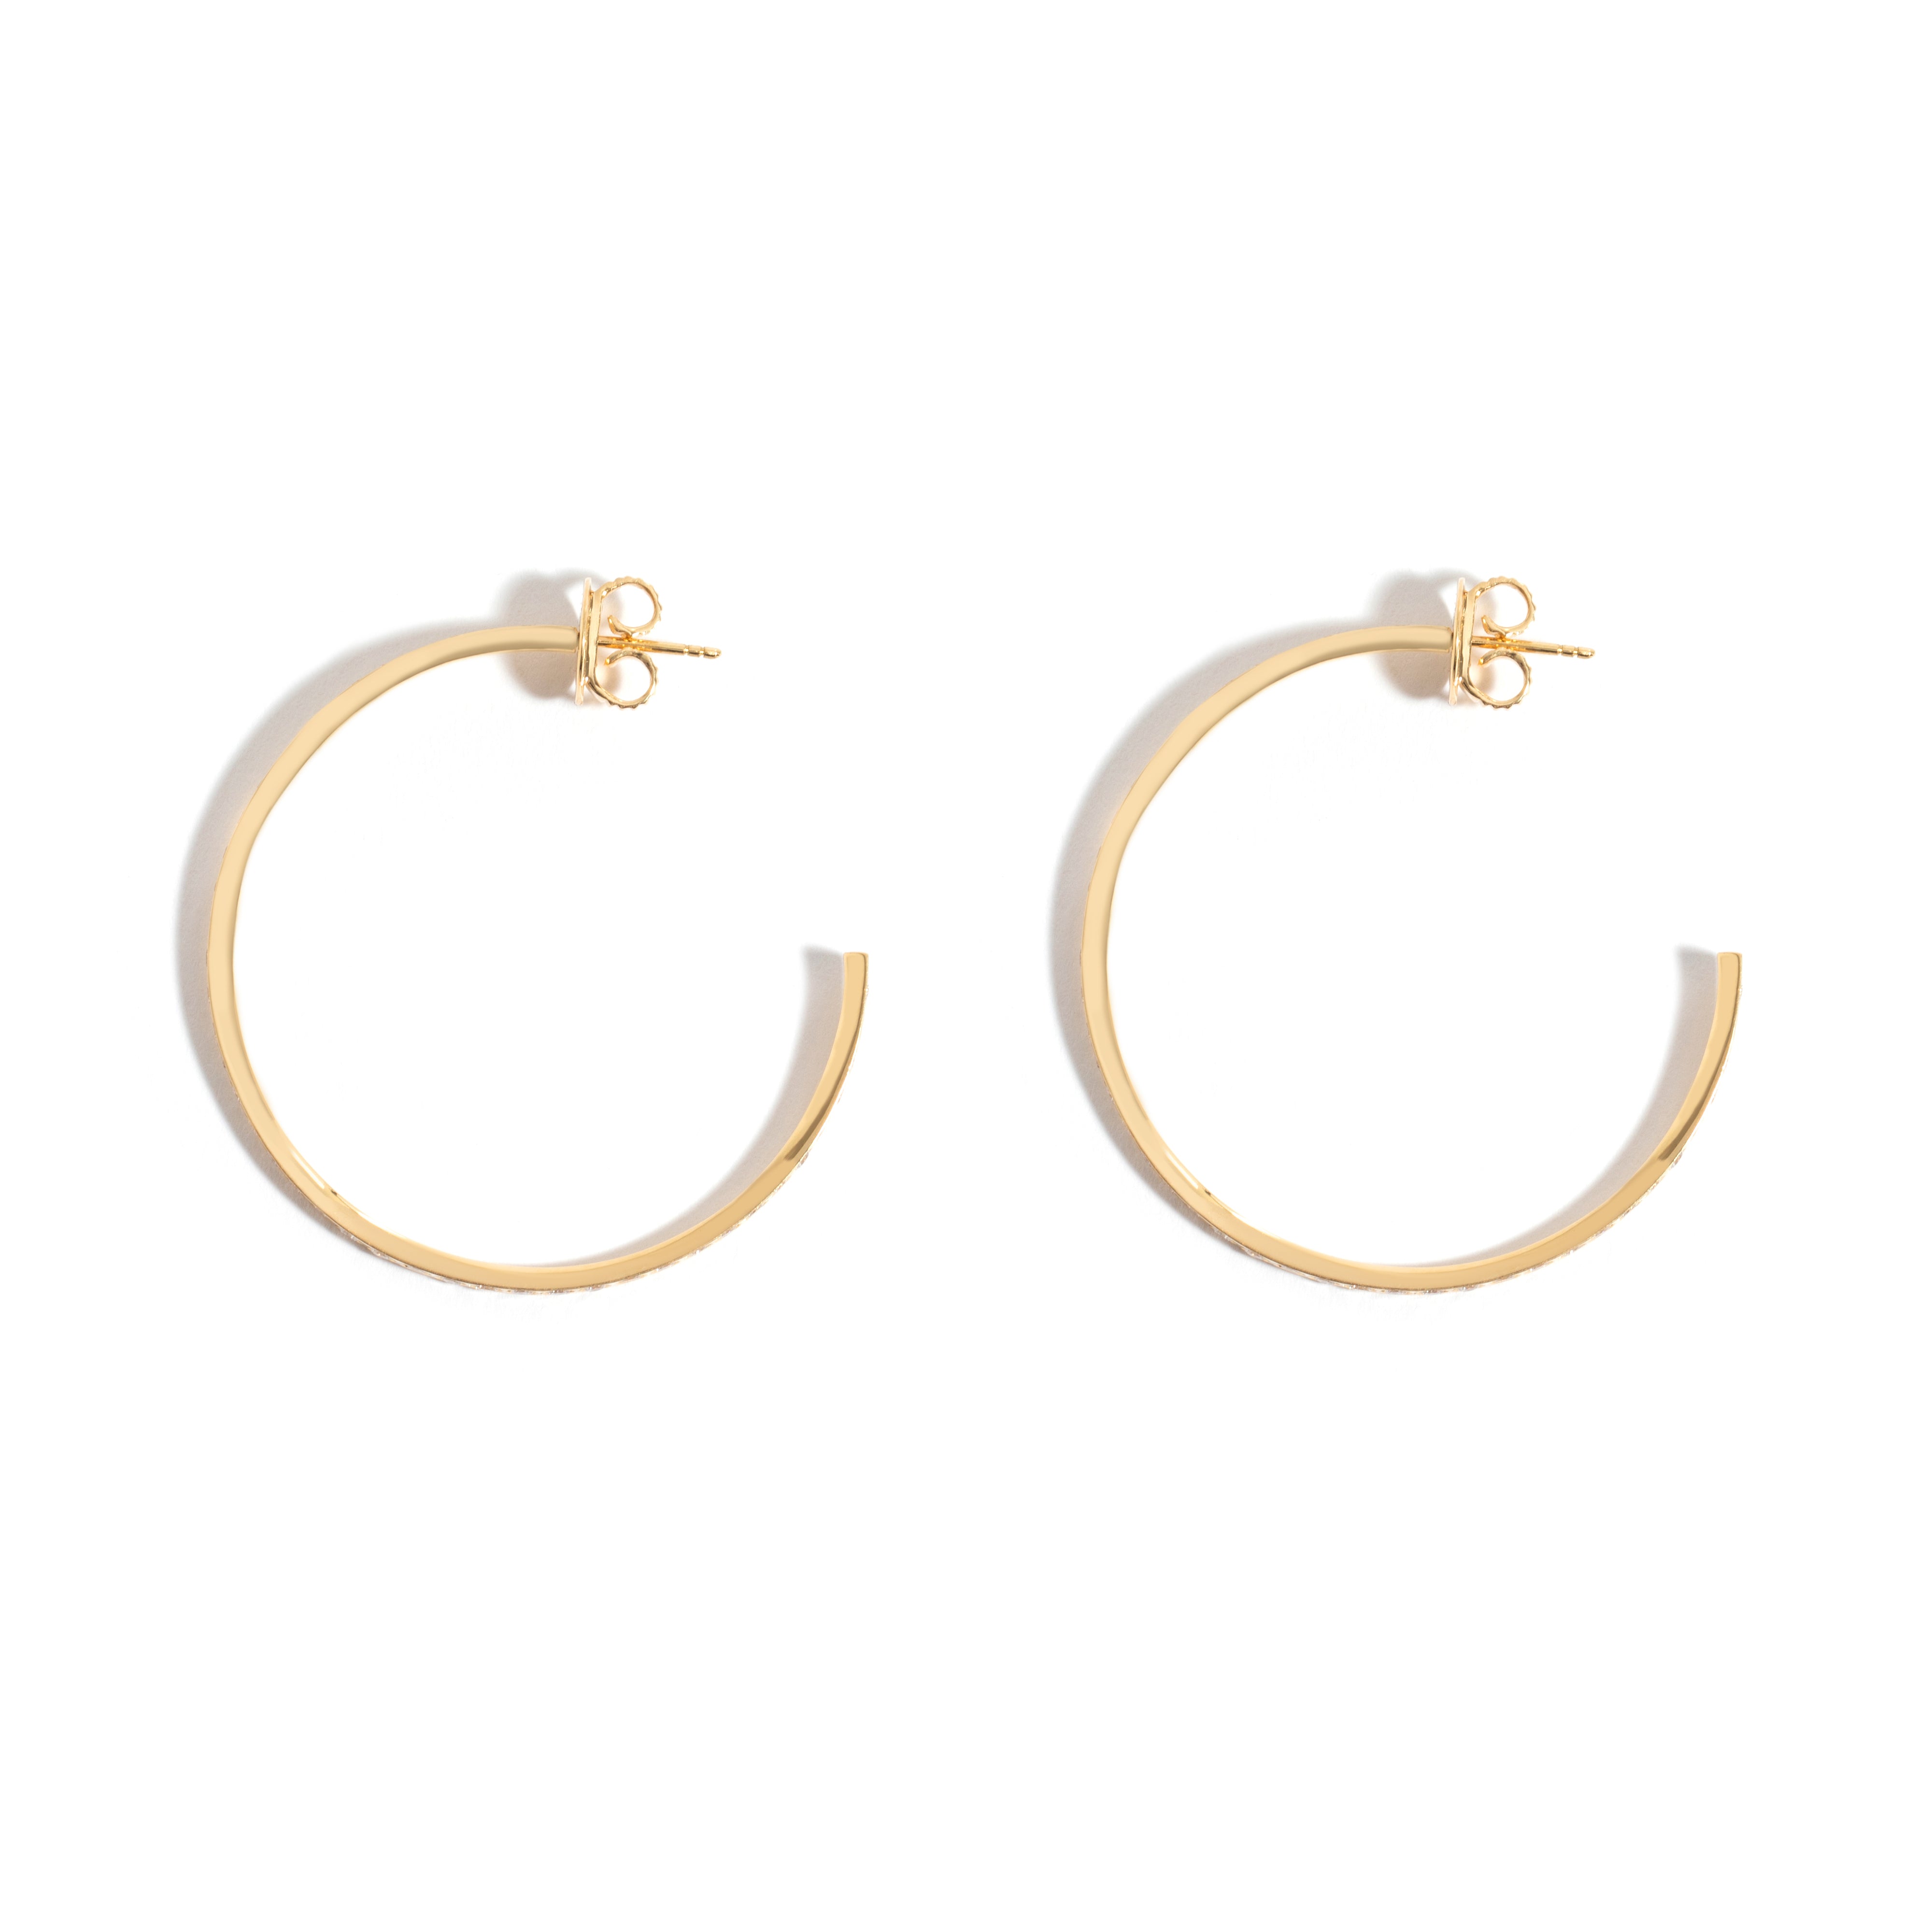 NEW VINTAGE POWER LARGE HOOP EARRING IN 18K YELLOW GOLD WITH DIAMOND